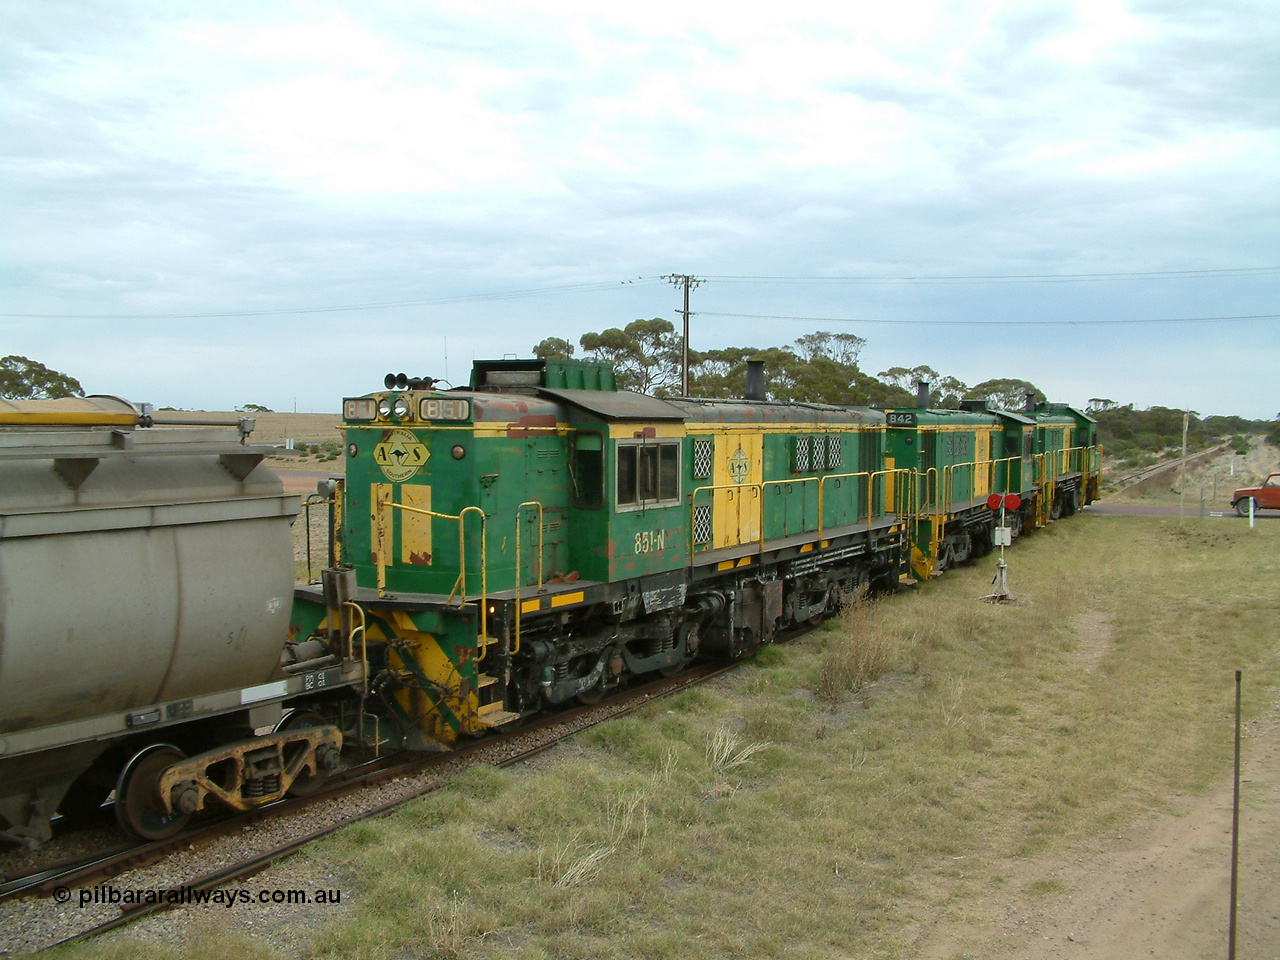 030407 100834
Minnipa, empty grain train shunts back into the grain siding with a trio of former Australian National Co-Co locomotives with rebuilt former AE Goodwin ALCo model DL531 830 class ex 839, serial no. 83730, rebuilt by Port Augusta Workshops to DA class, leading two AE Goodwin ALCo model DL531 830 class units 842, serial no. 84140 and 851 serial no. 84137, 851 having been on the Eyre Peninsula since delivered in 1962. 7th April, 2003.
Keywords: 830-class;851;84137;AE-Goodwin;ALCo;DL531;